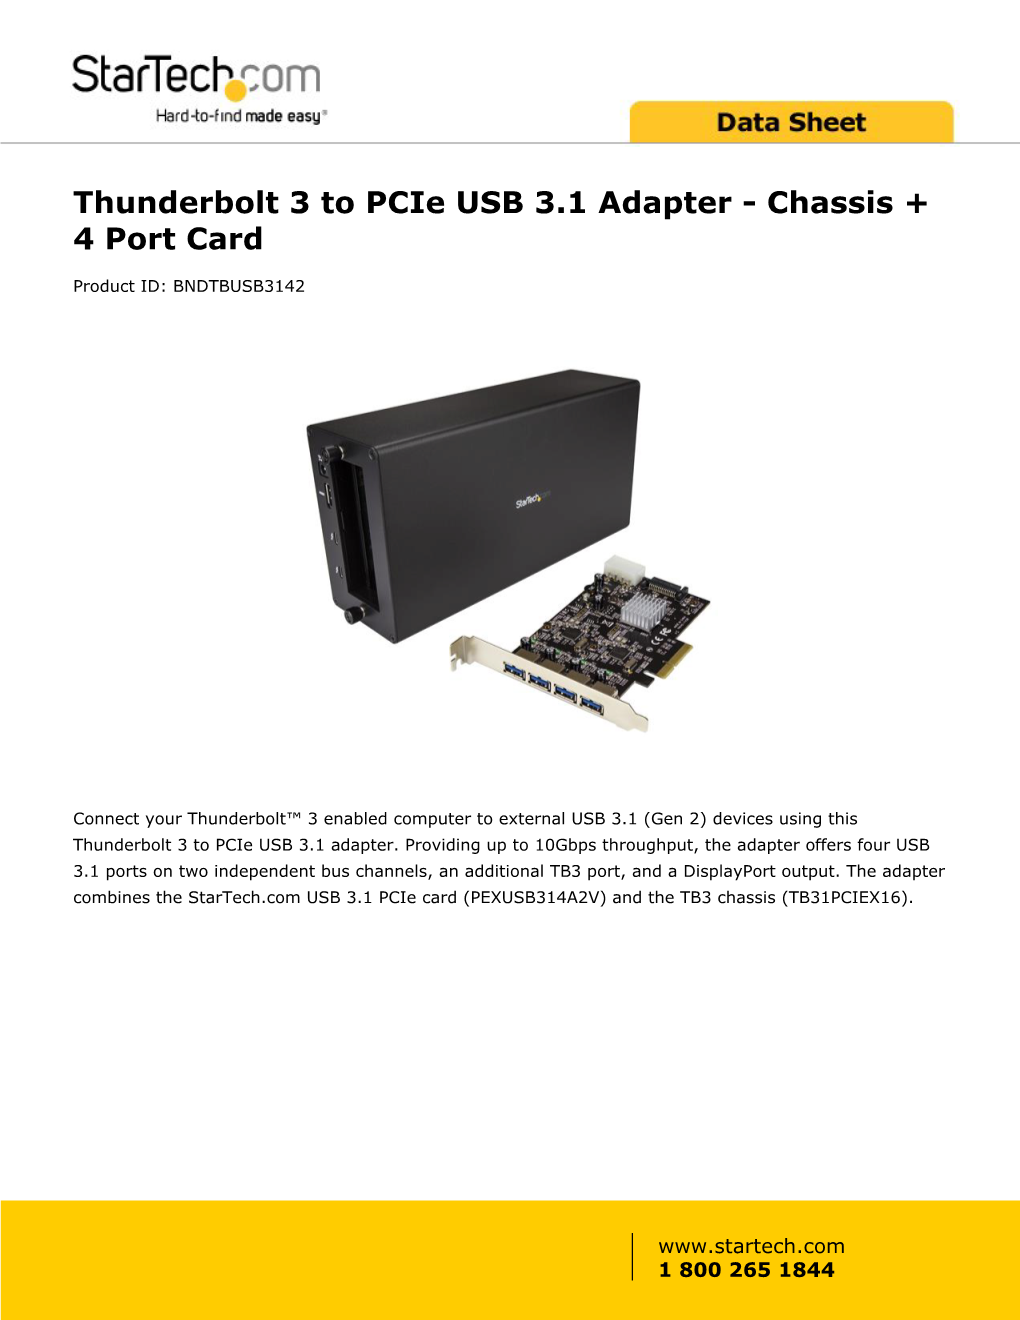 Thunderbolt 3 to Pcie USB 3.1 Adapter - Chassis + 4 Port Card